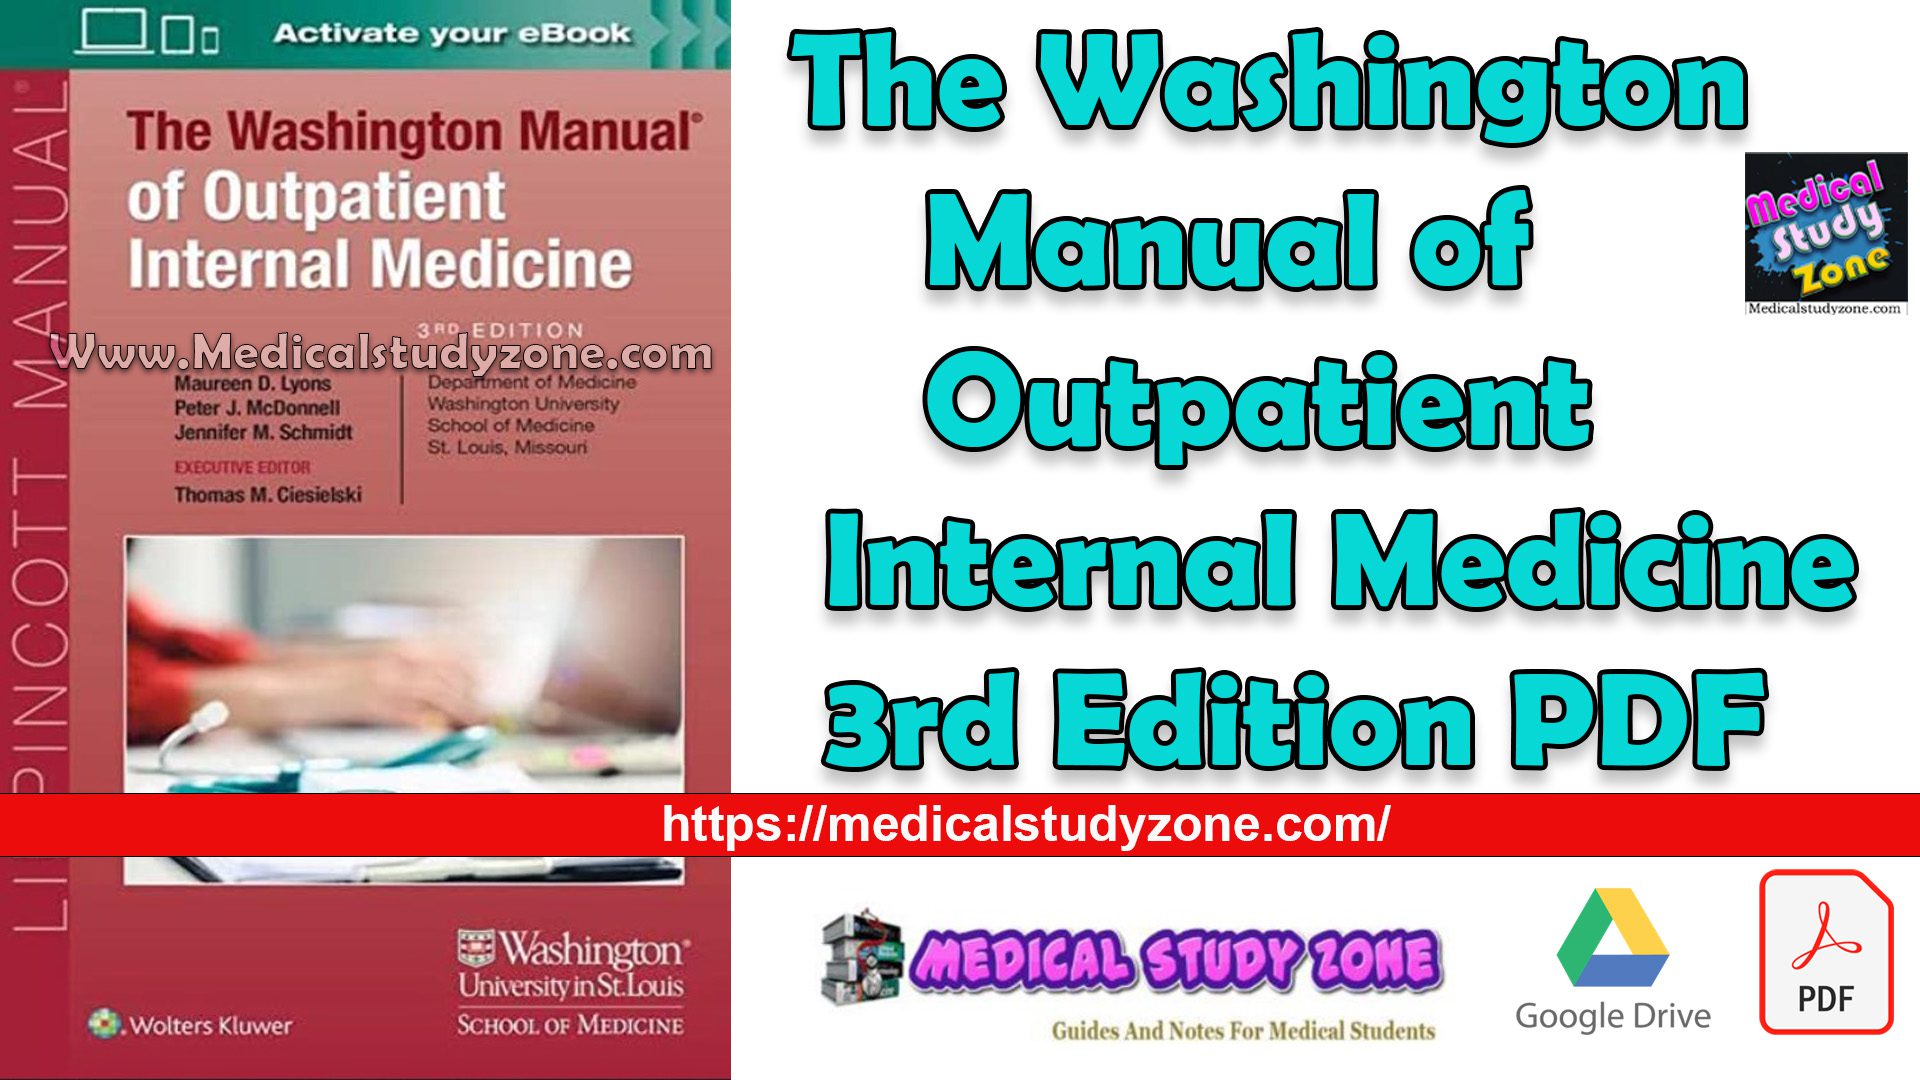 The Washington Manual of Outpatient Internal Medicine 3rd Edition PDF Free Download